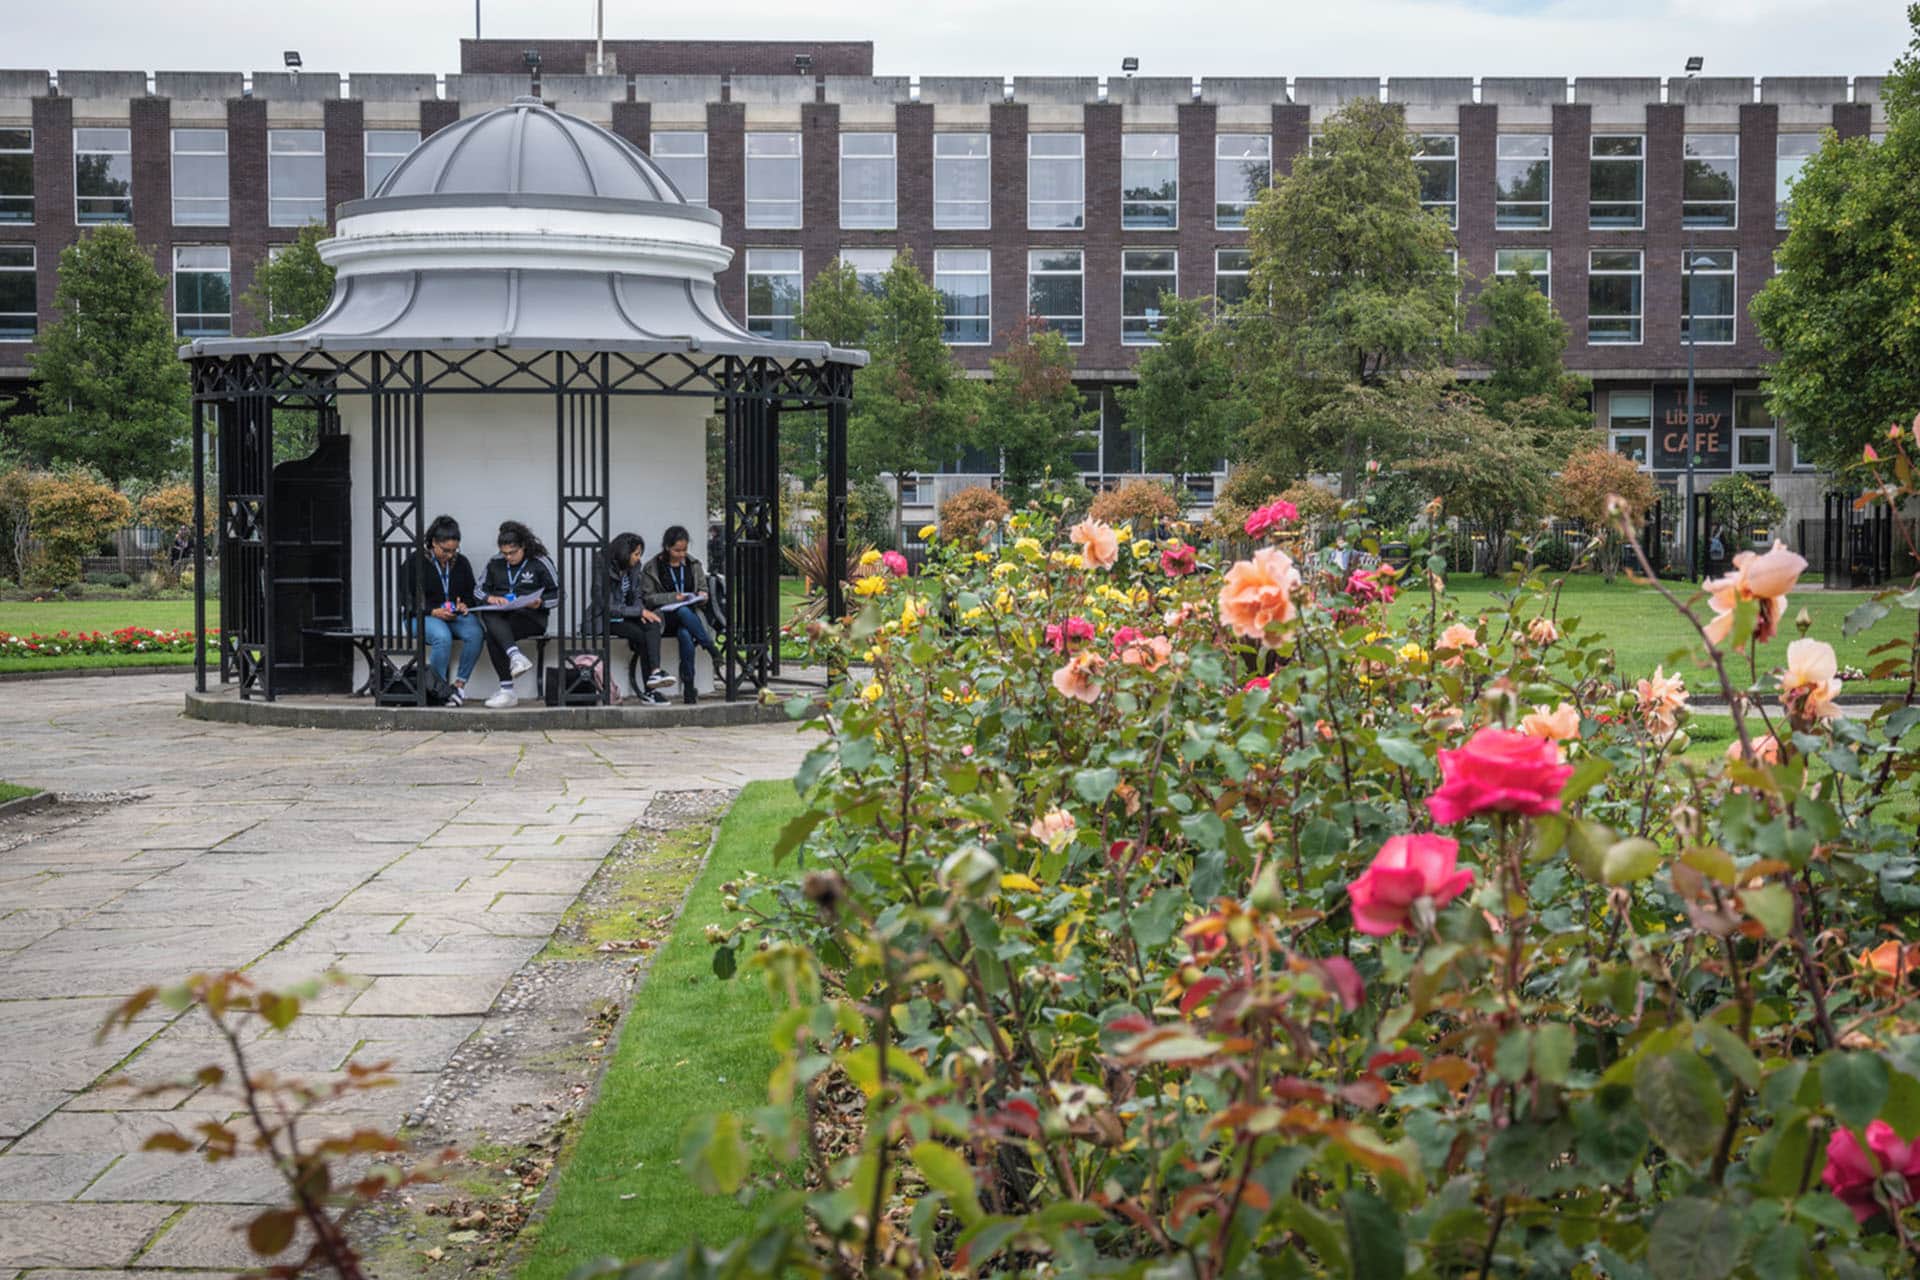 Group of students sitting in pergola in Abercromby Square